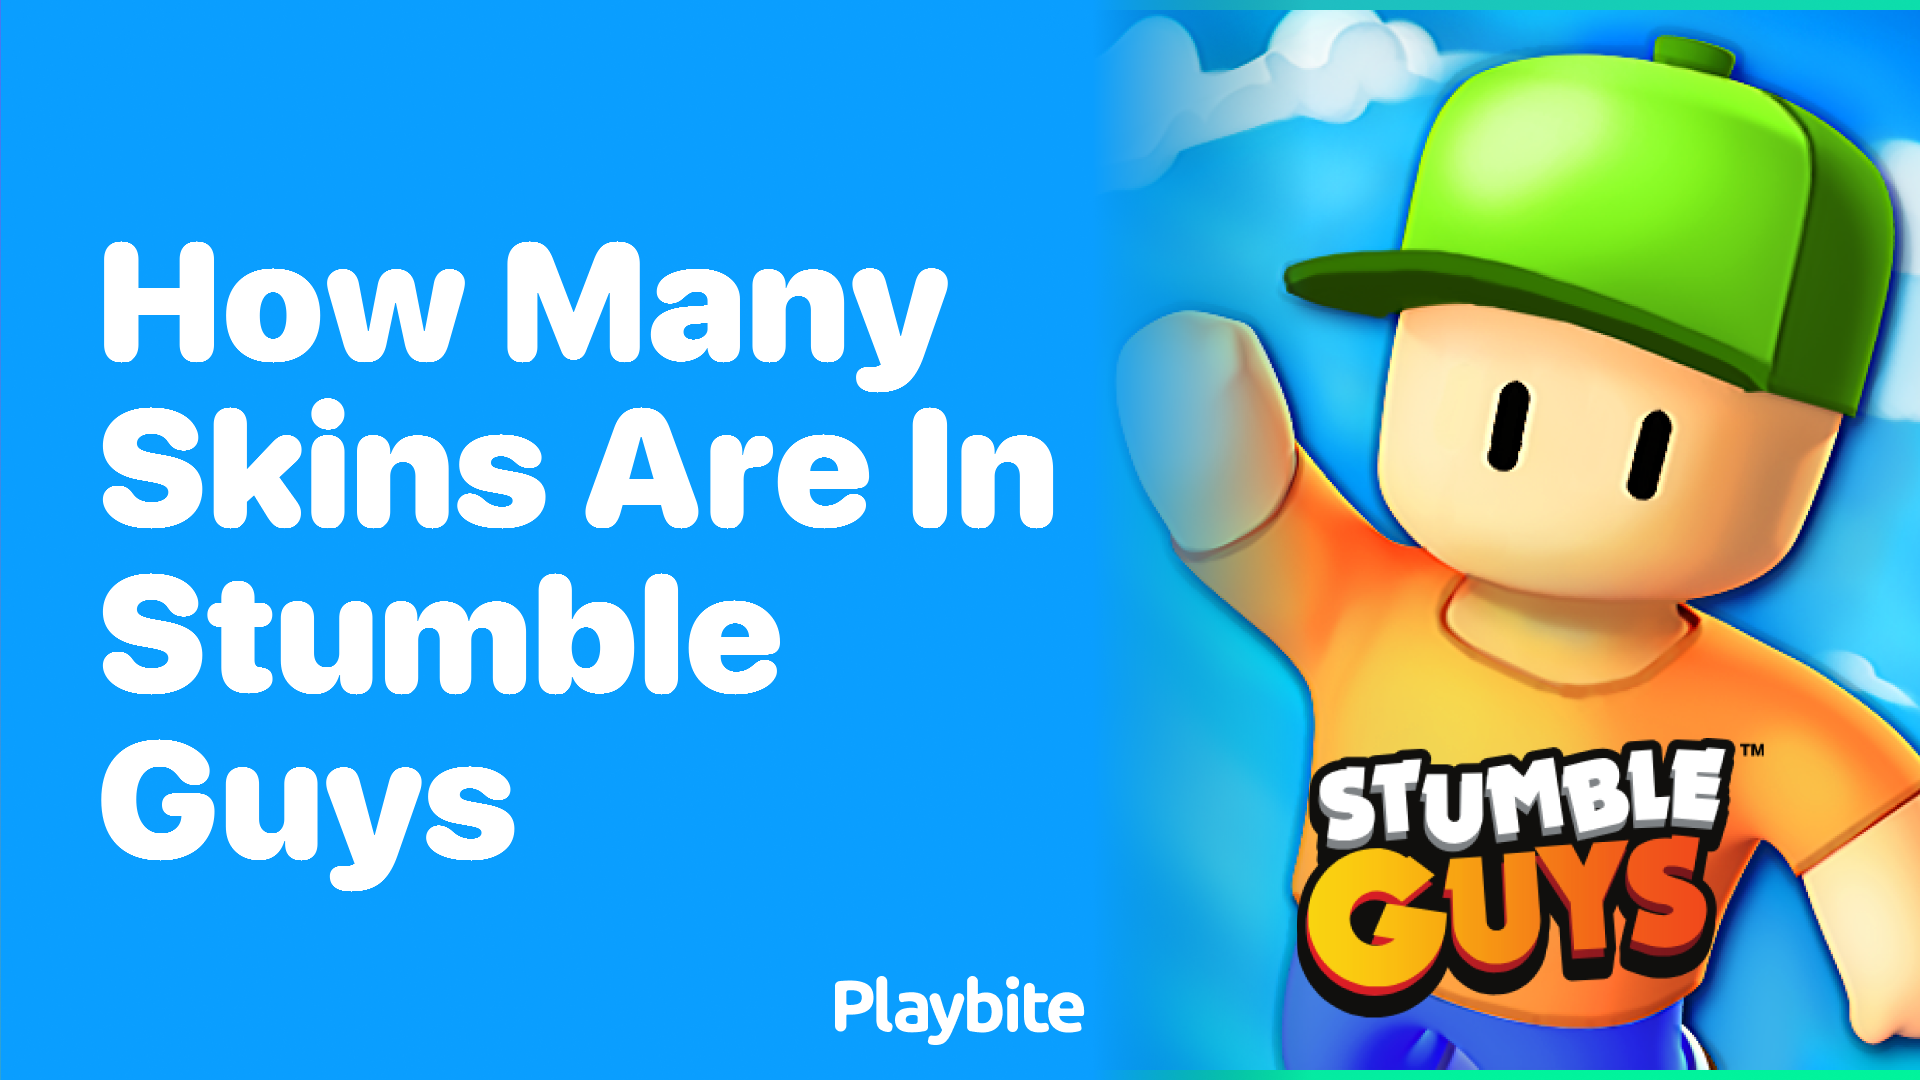 How Many Skins Are in Stumble Guys? Unwrapping the Wardrobe